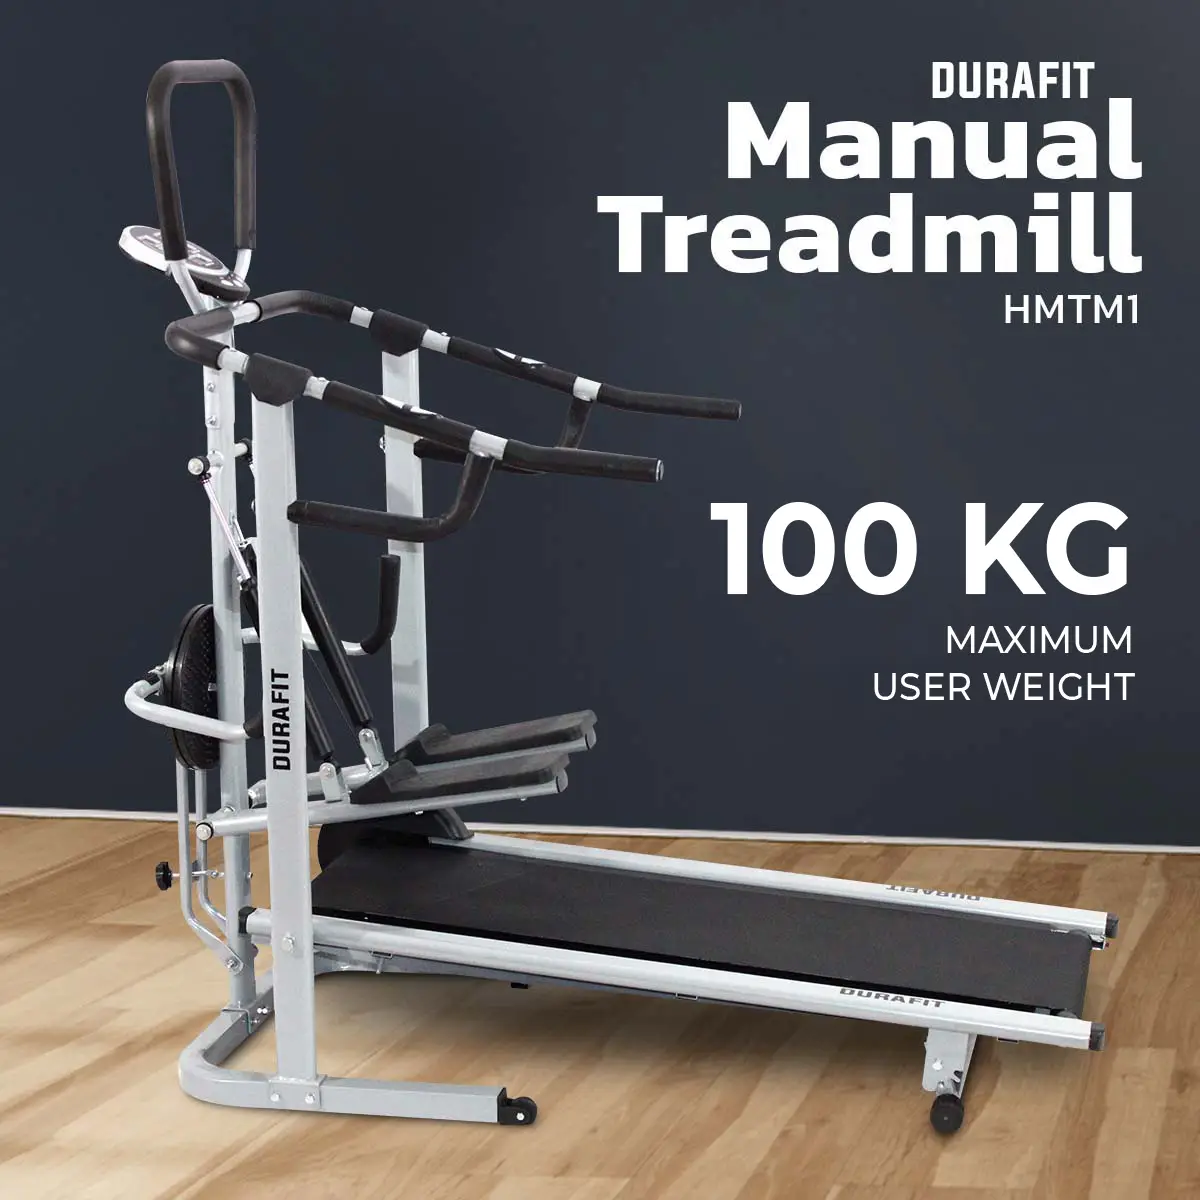 Durafit Manual Treadmill Hmtm1 with 100kg max user weight